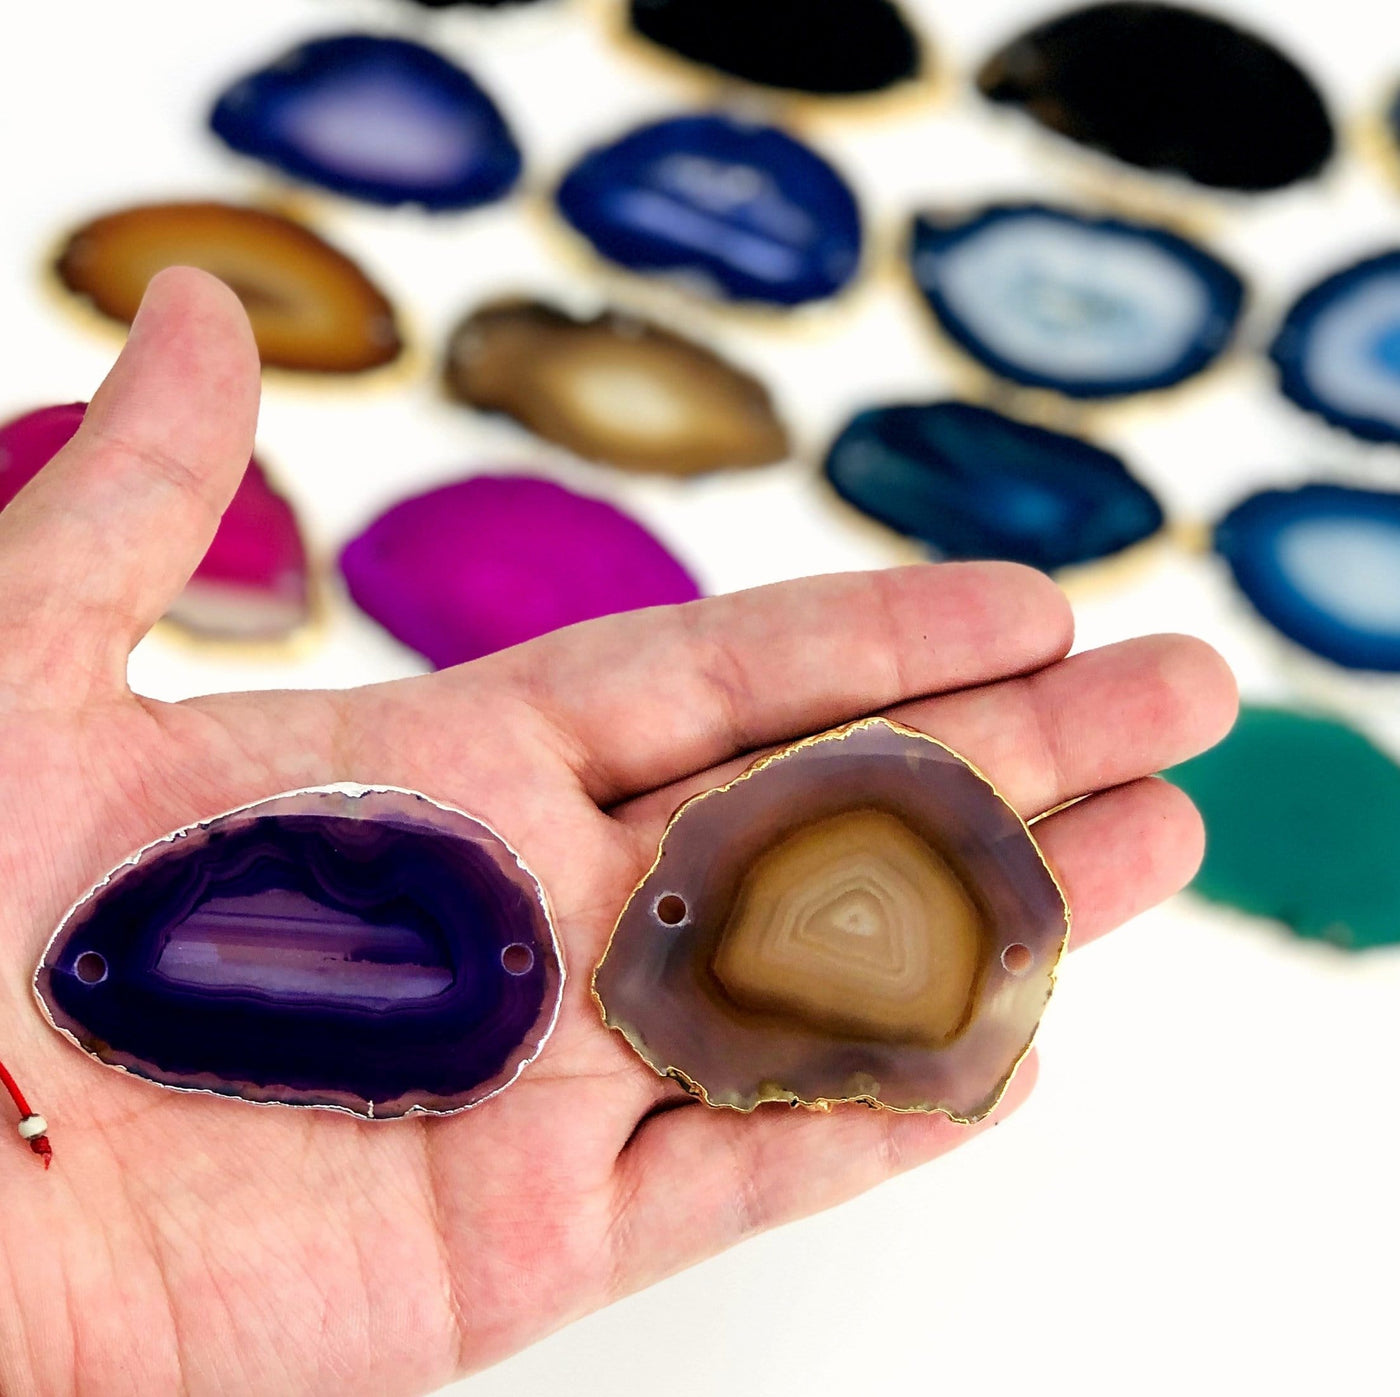 Picture of our purple and natural agate  slice being displayed in hand for size reference.